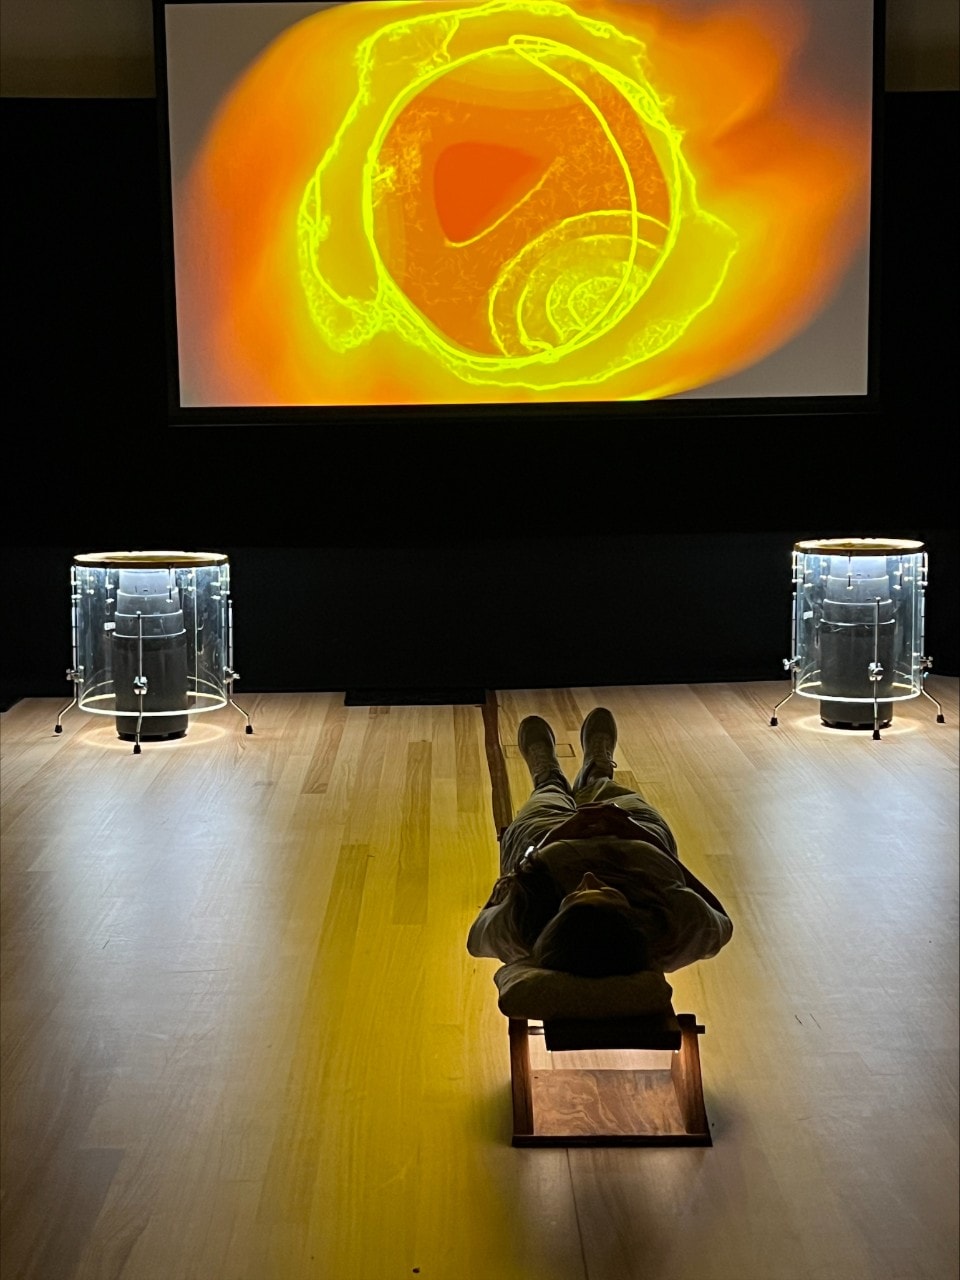 a man lying on the floor listening to sounds with a screen showing orange abstract images